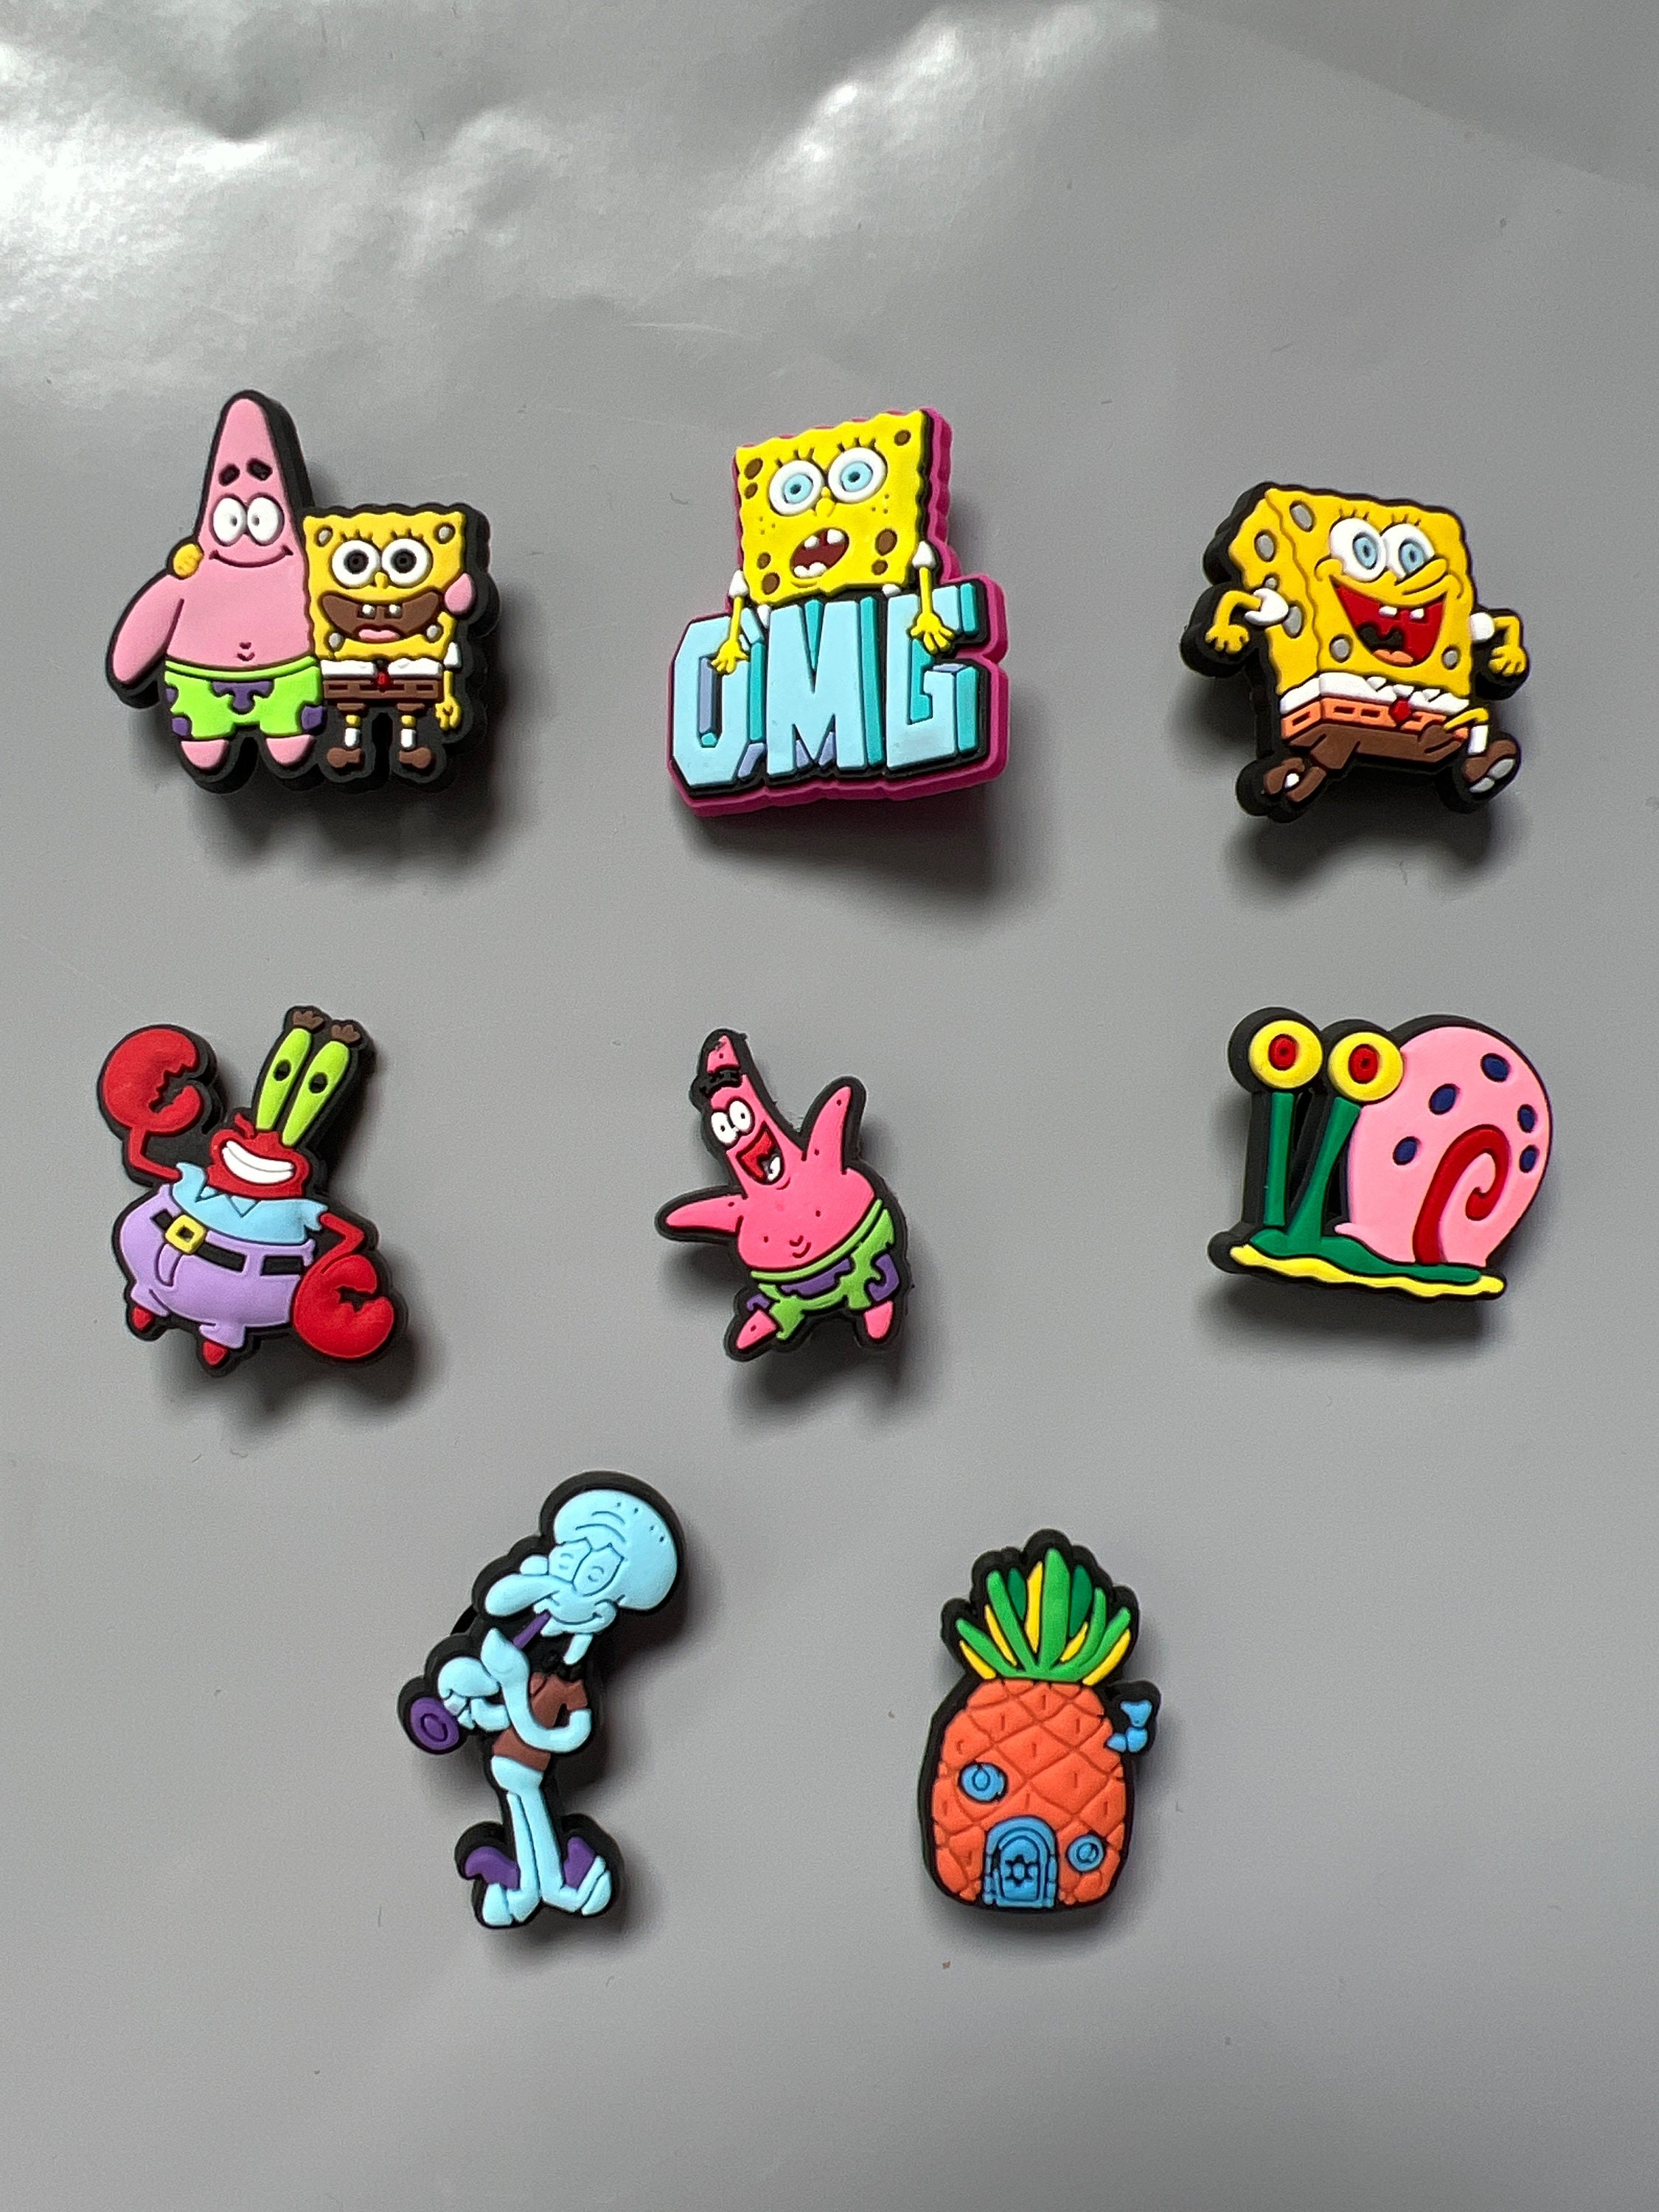 SpongeBob SquarePants Imagination Rainbow Patch Nickelodeon Cartoon  Television Embroidered Iron On – Patch Collection